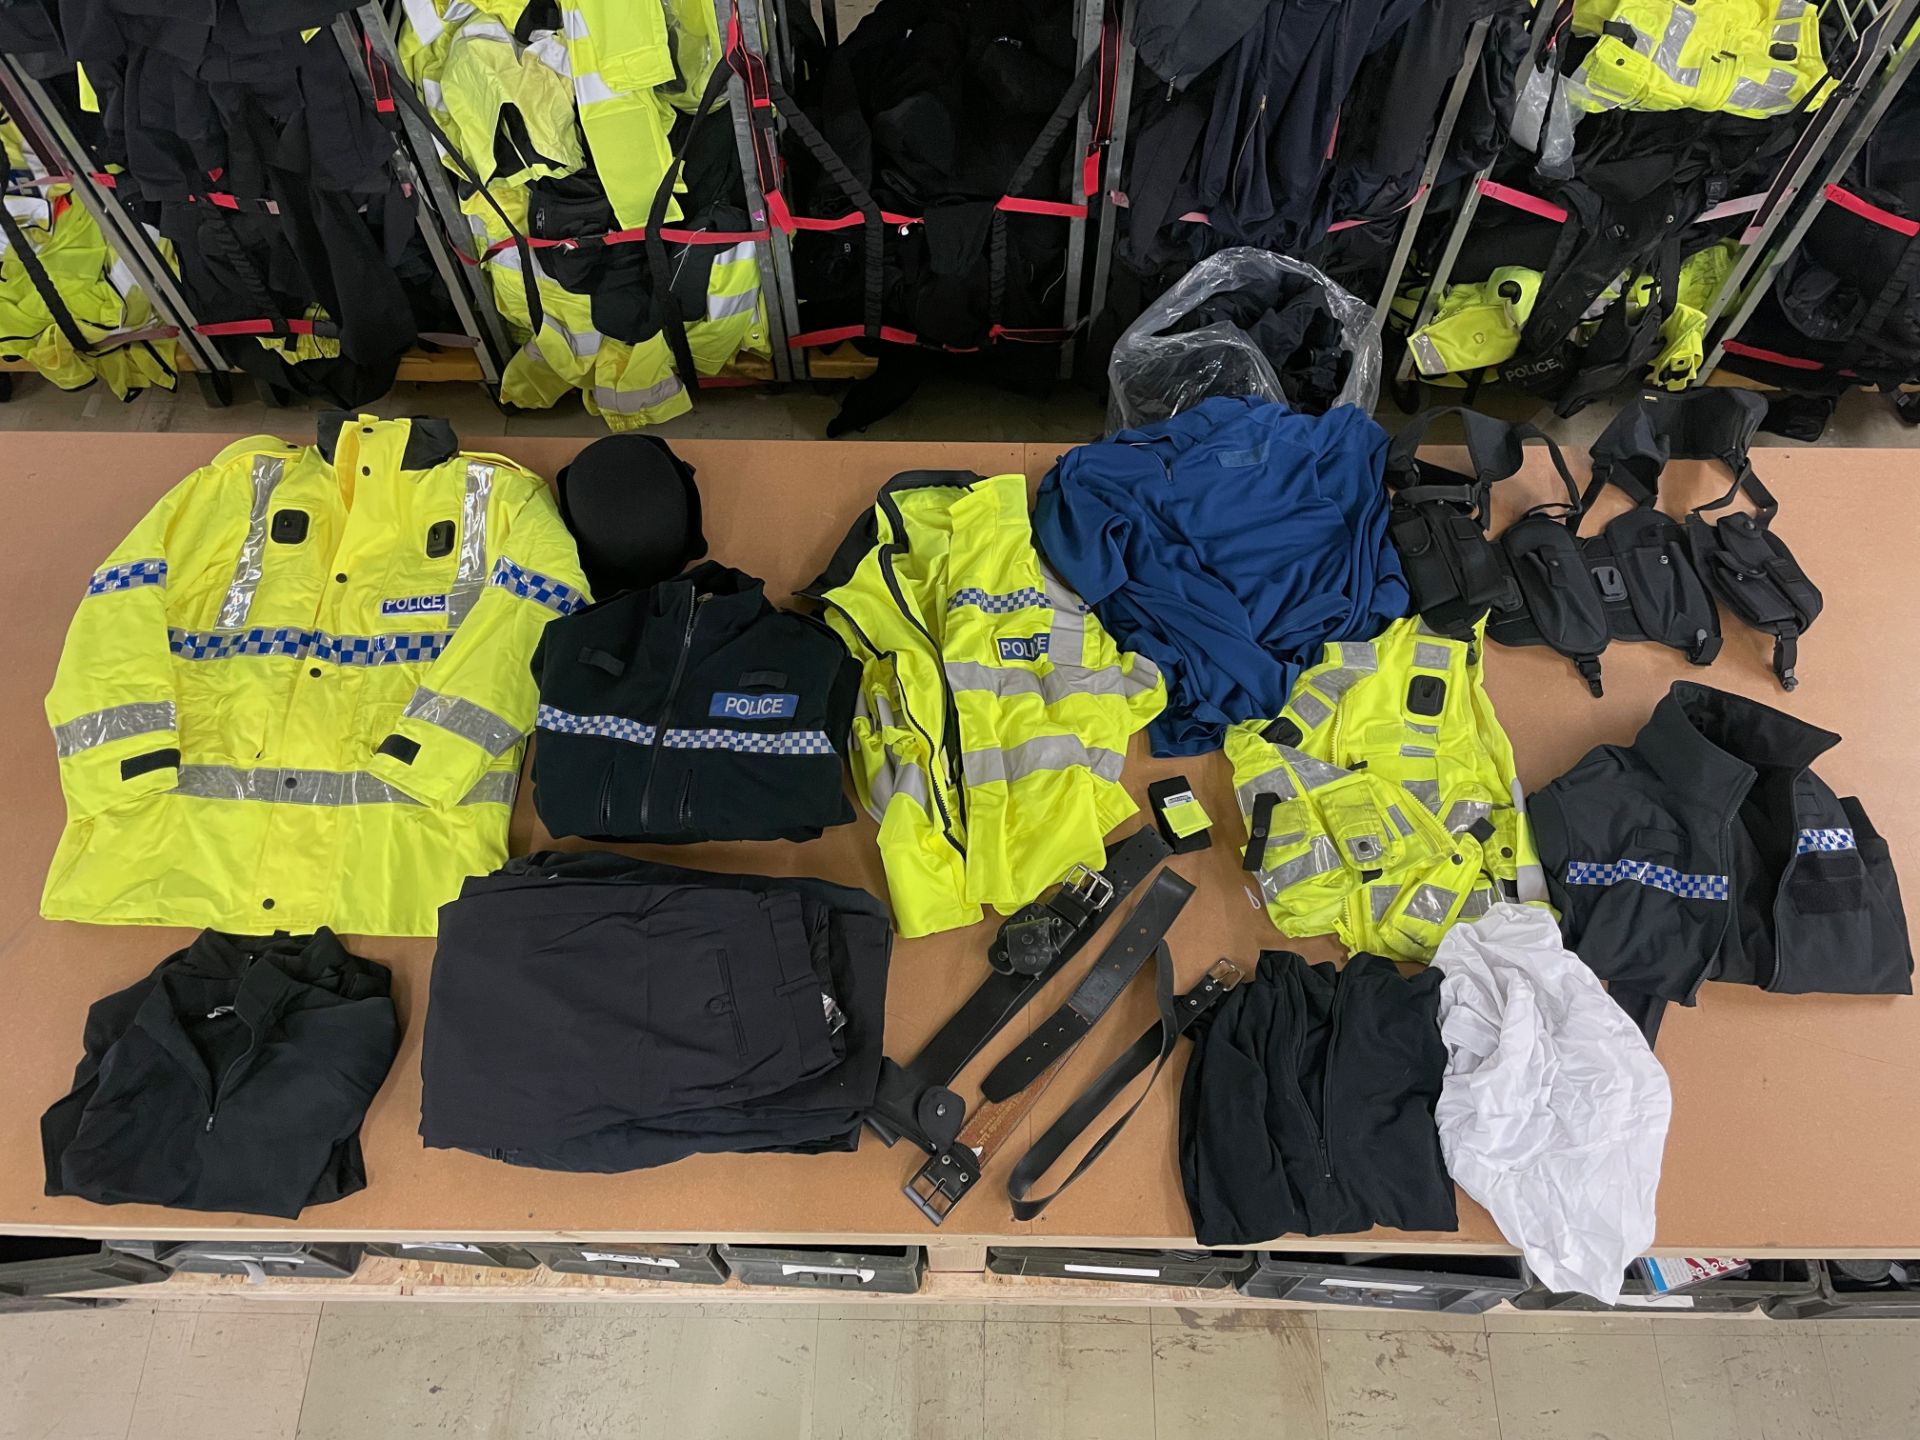 SINGLE BAG MIXED POLICE CLOTHING & ACCESSORIES - RRP £275.00 - Image 11 of 12